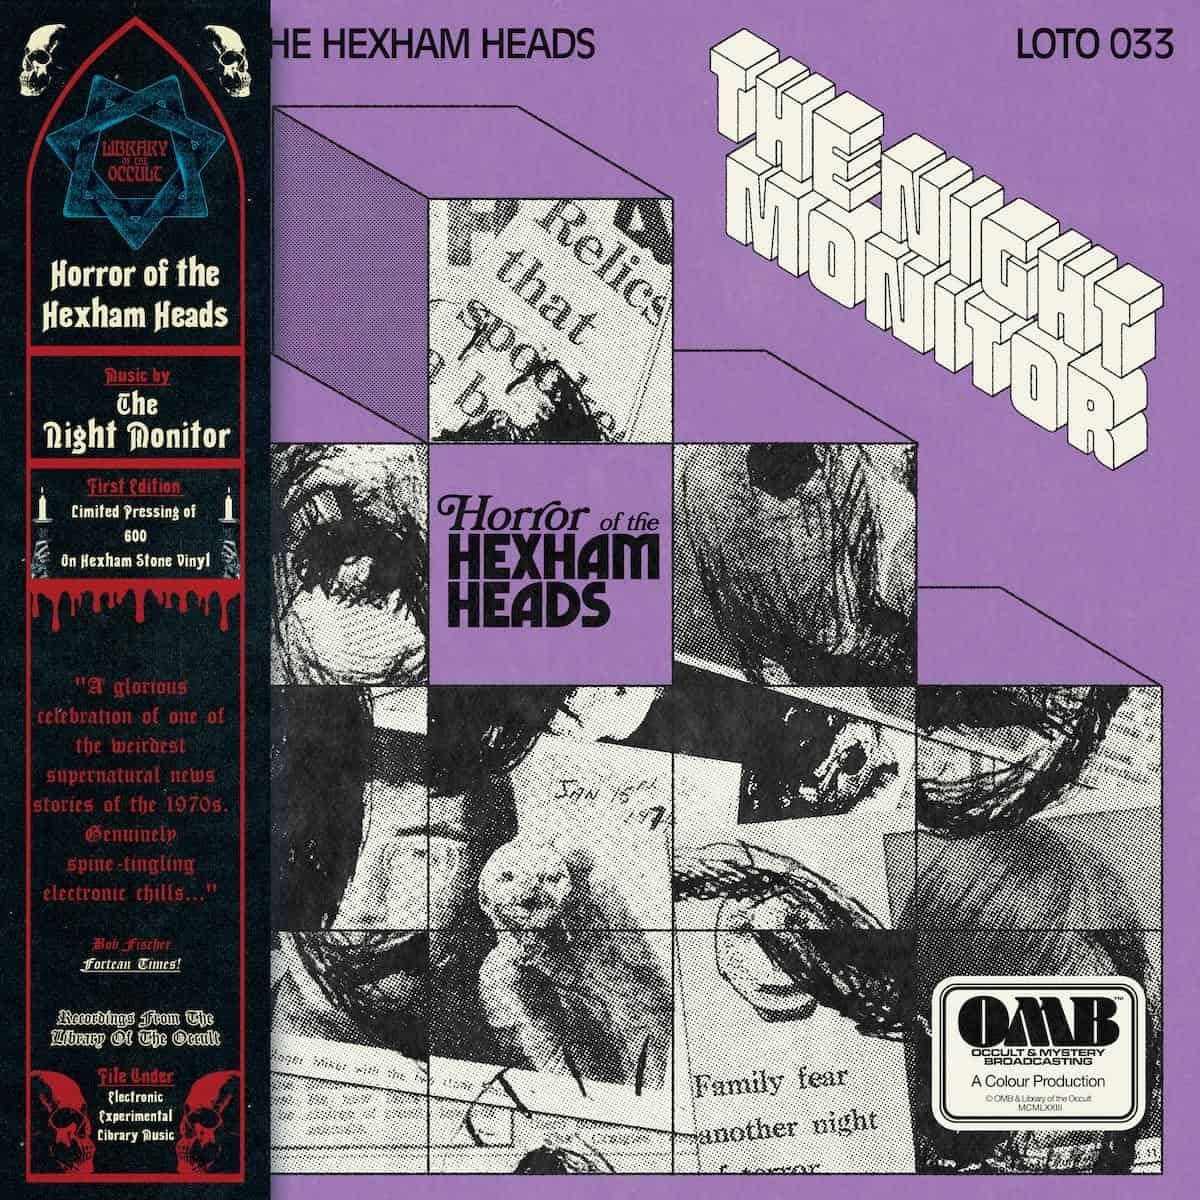 JUST IN! 'Horror of the Hexham Heads' by The Night Monitor

Spectral electronic made up of vintage layered synthesisers, big tip for hauntology chasers and fans of the Ghost Box label, the Radiophonic Workshop, and early electronic.

@TheNightMonitor
normanrecords.com/records/202581…